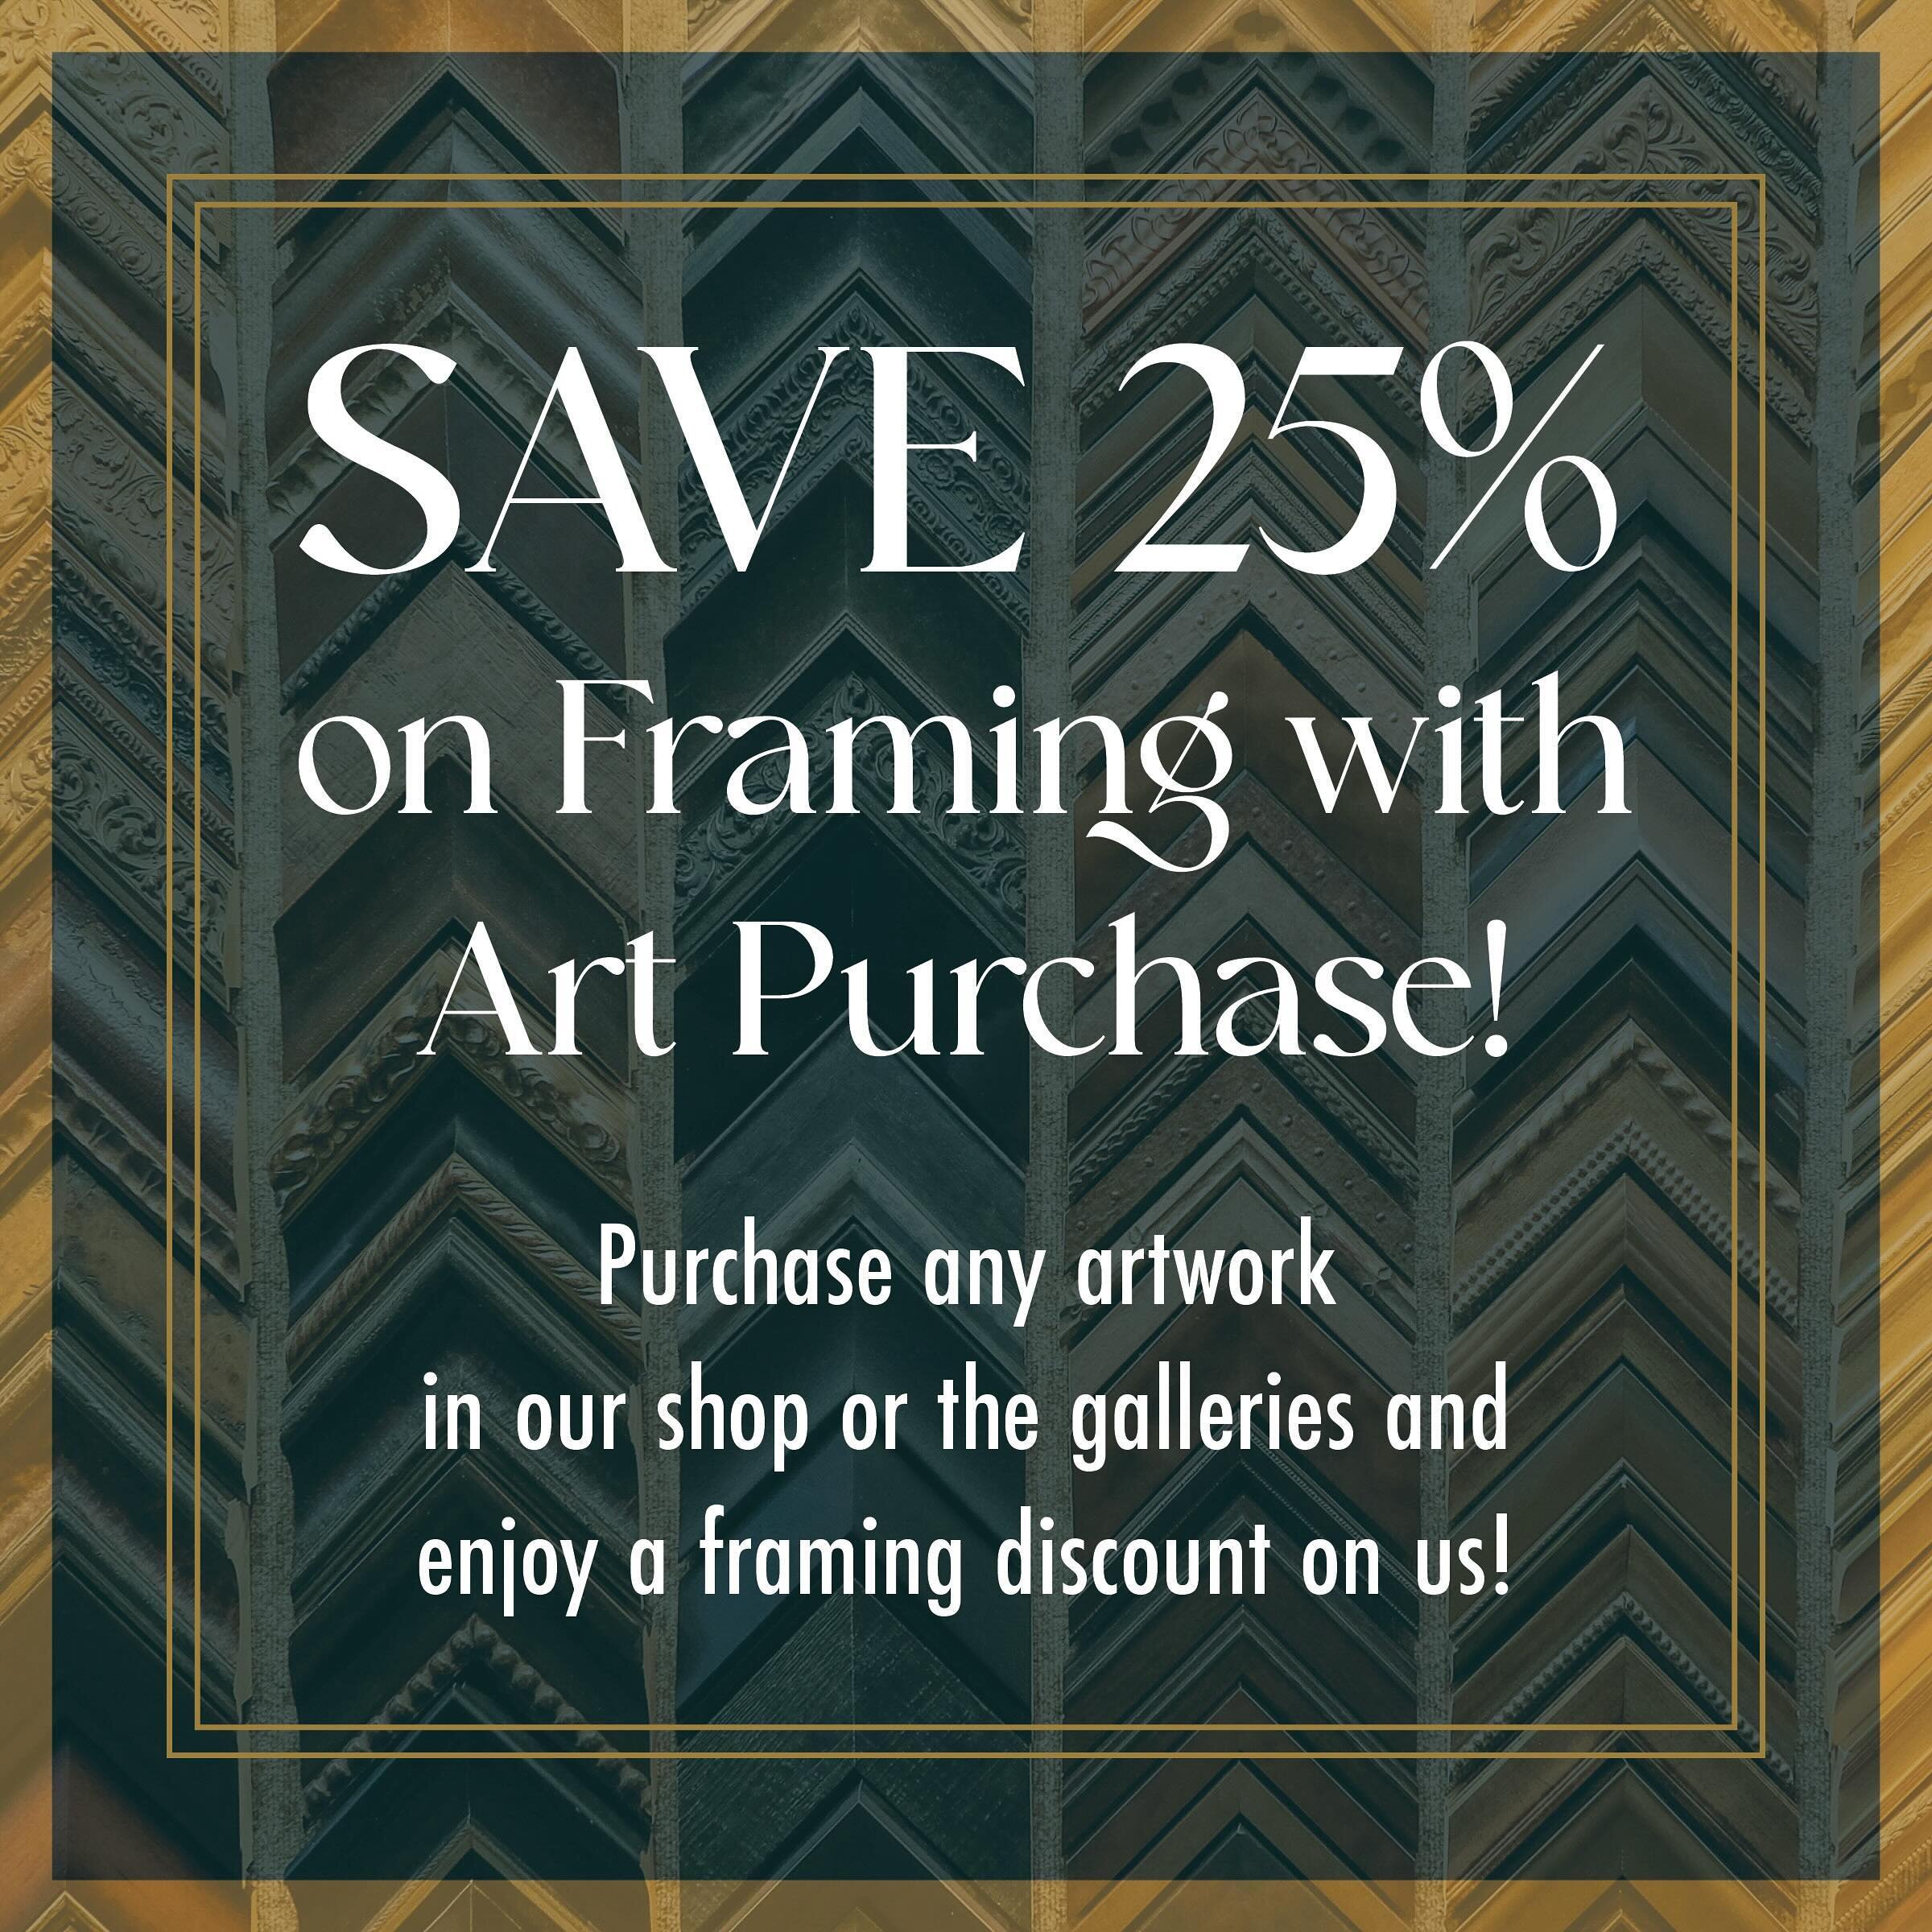 We&rsquo;re trying out something new! We have some really incredible artwork (prints, originals, etchings, etc) in our shop from local artists and beyond. Starting now, when you purchase artwork in the shop or our galleries, enjoy 25% off your framin